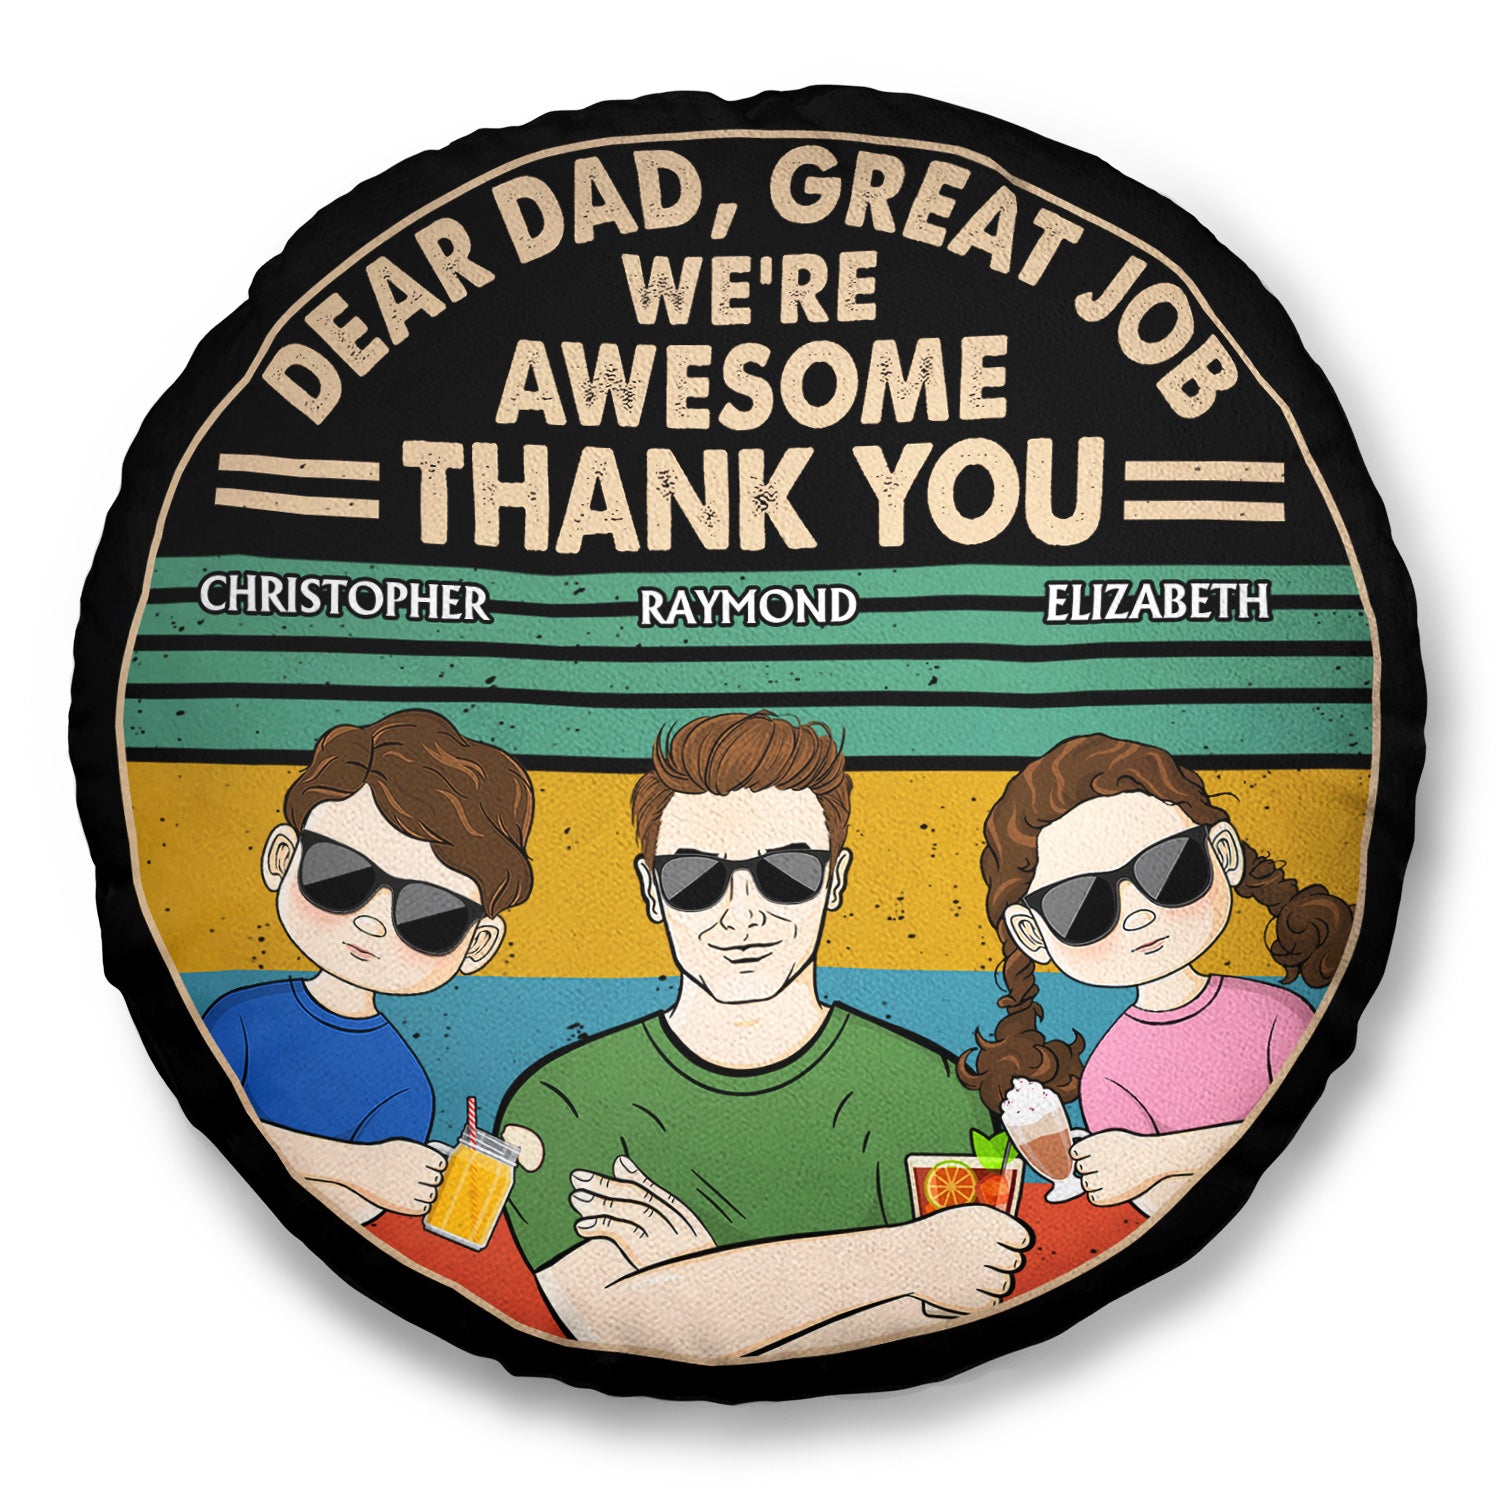 Dear Dad Great Job We're Awesome Thank You Young - Birthday, Loving Gift For Dad, Father, Grandpa, Grandfather - Personalized Custom Round Pillow